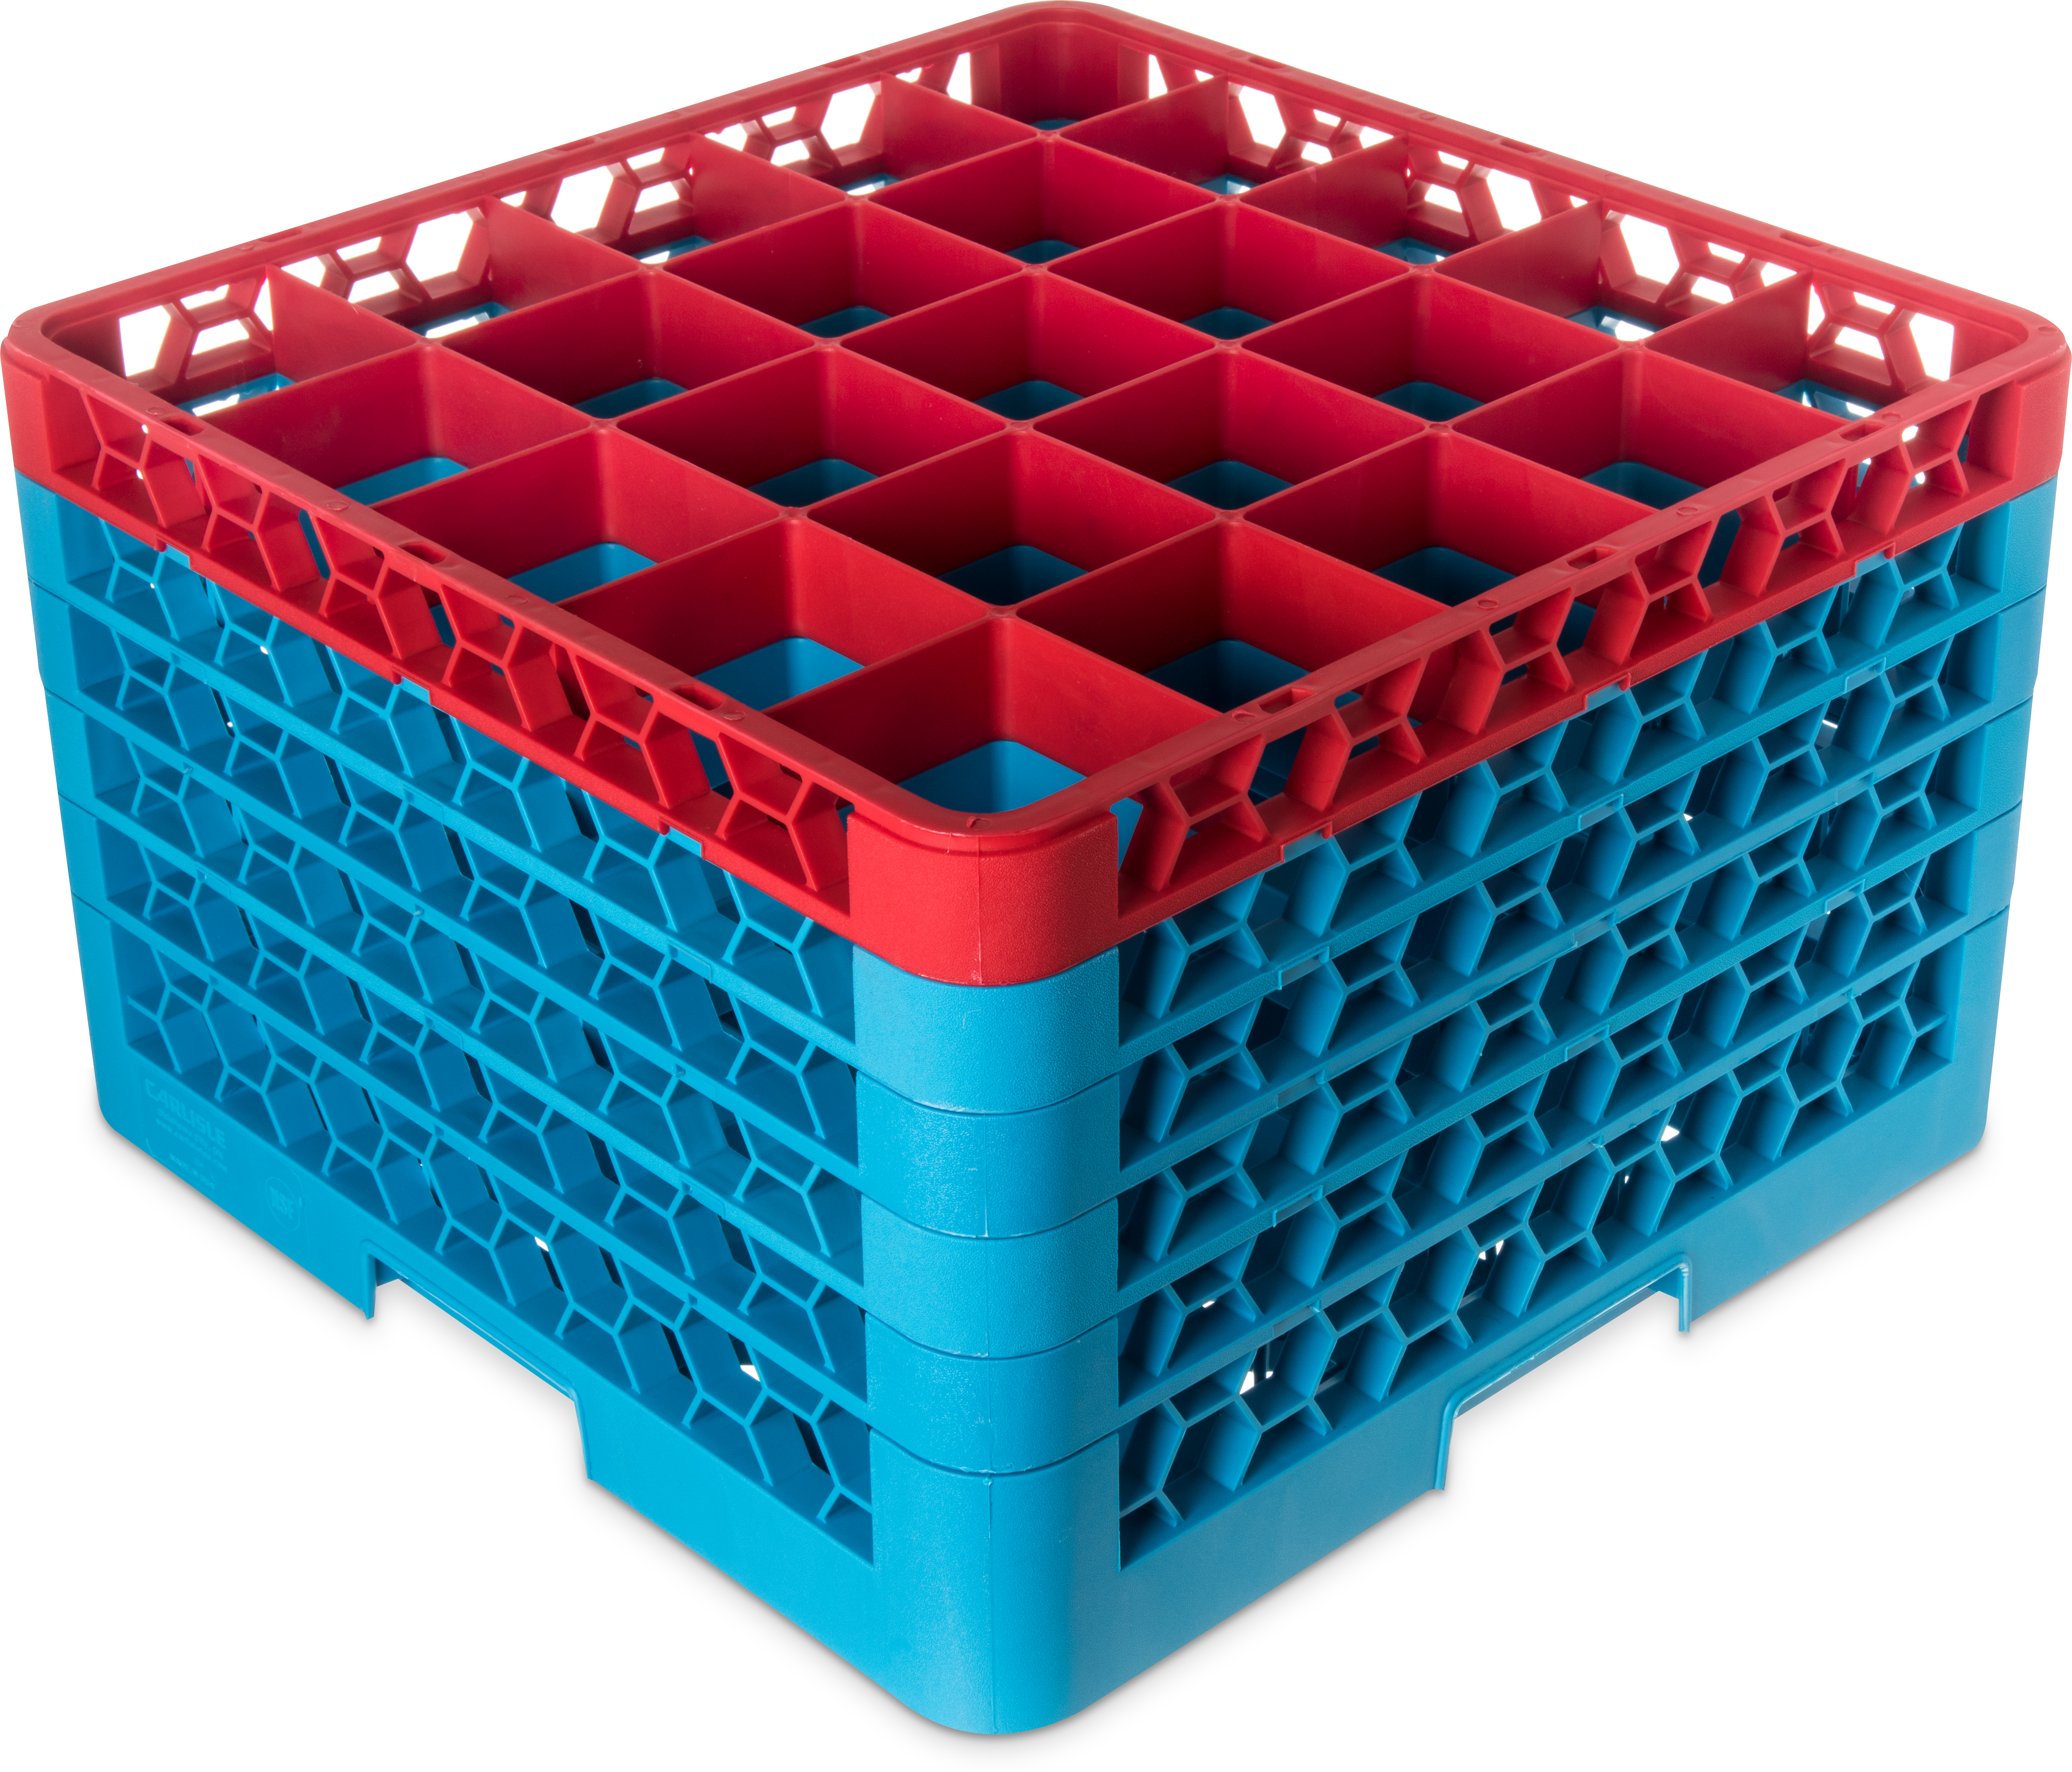 OptiClean 25 Compartment Glass Rack with 5 Extenders 11.9 - Red-Carlisle Blue